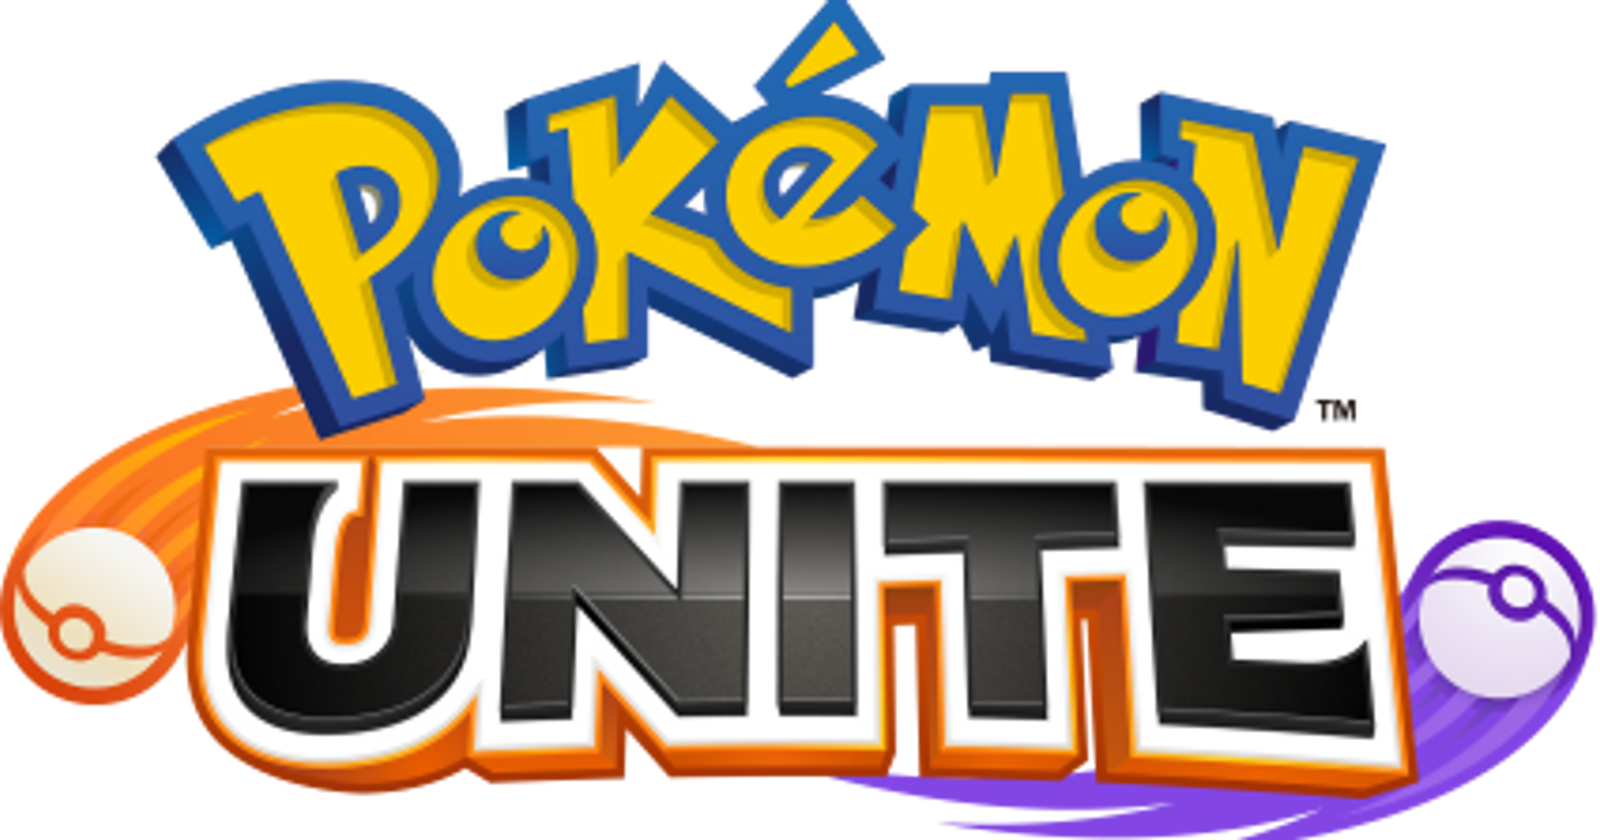 Potential fixes for the Account Authentication Expired error in Pokemon  Unite